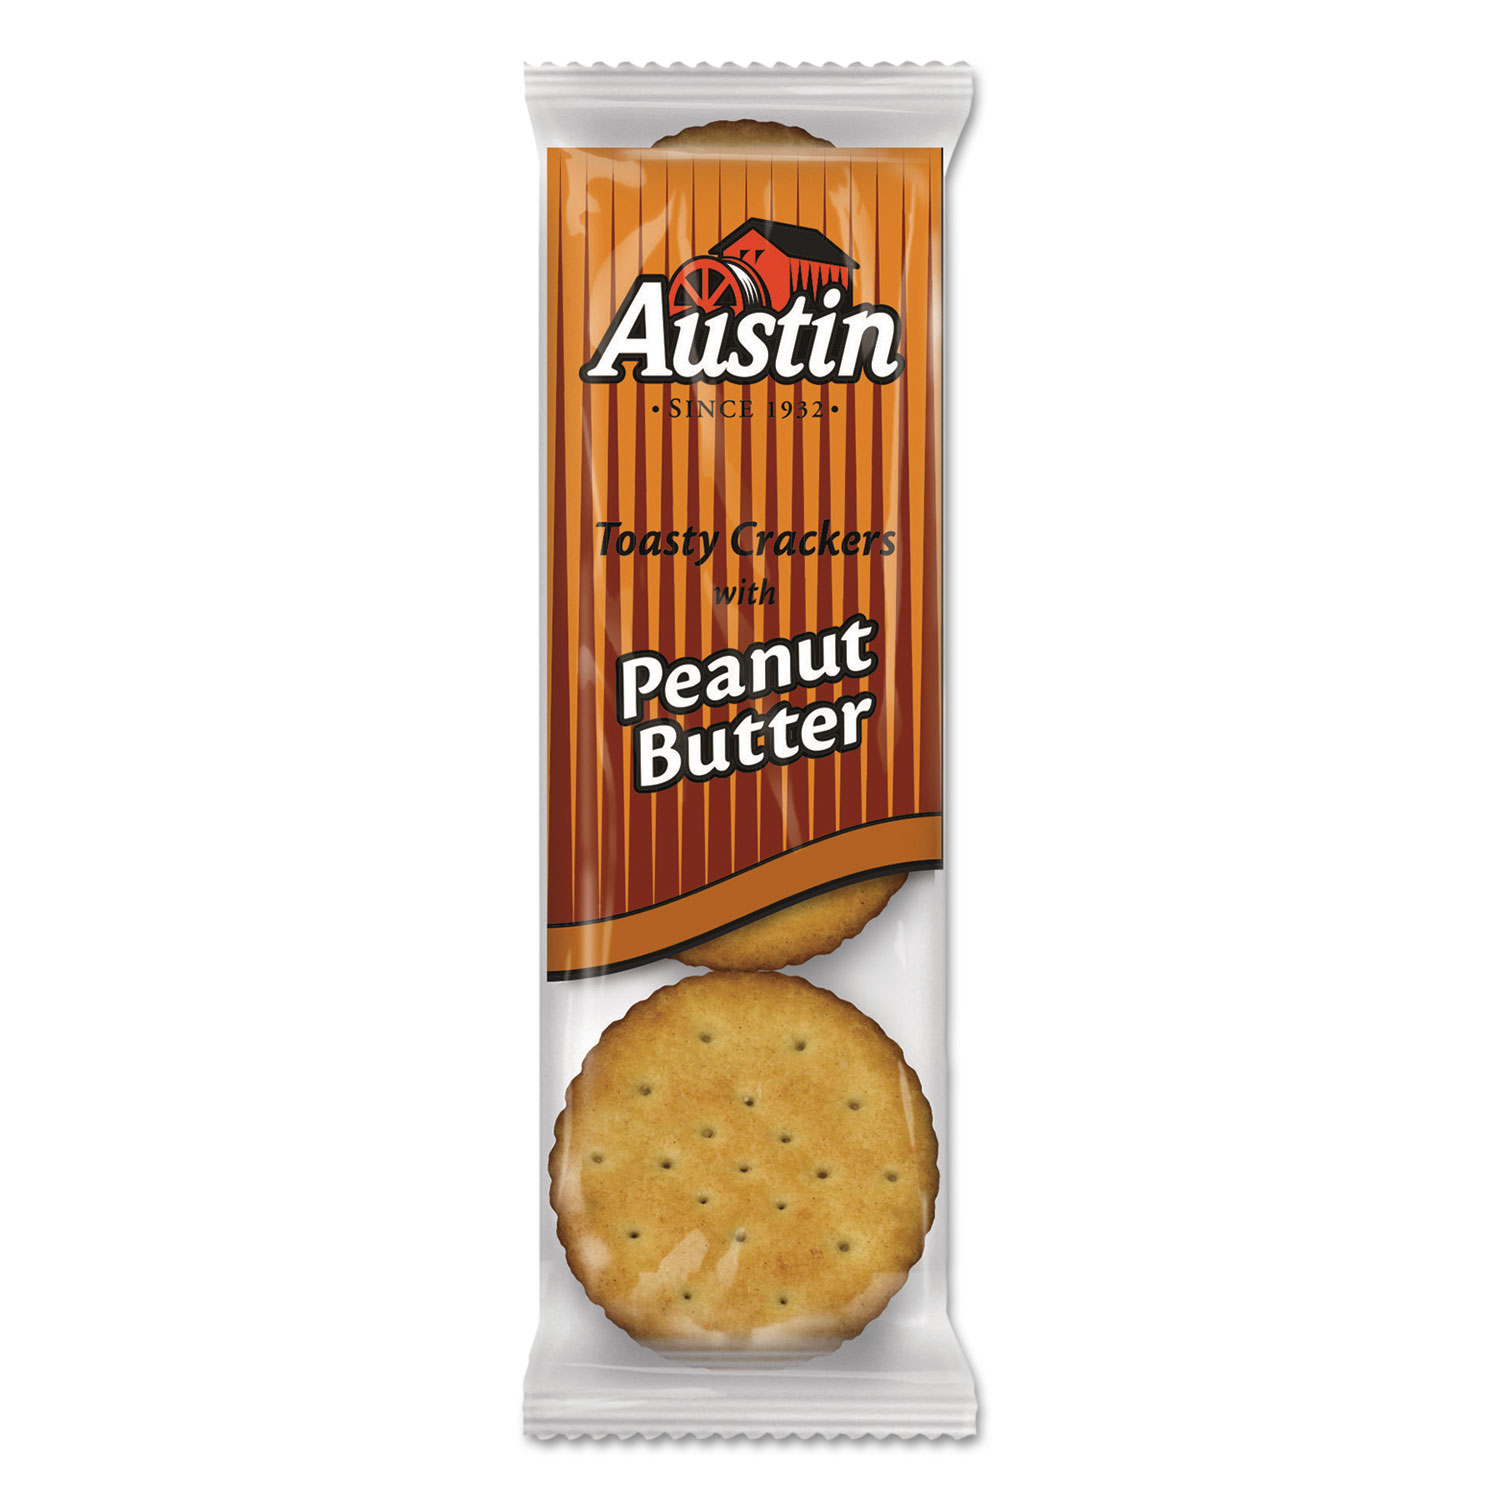  Austin 827548 Toasty Crackers w/Peanut Butter, 6-Piece Snack Pack, 45 Packs/Box (KEB827548) 